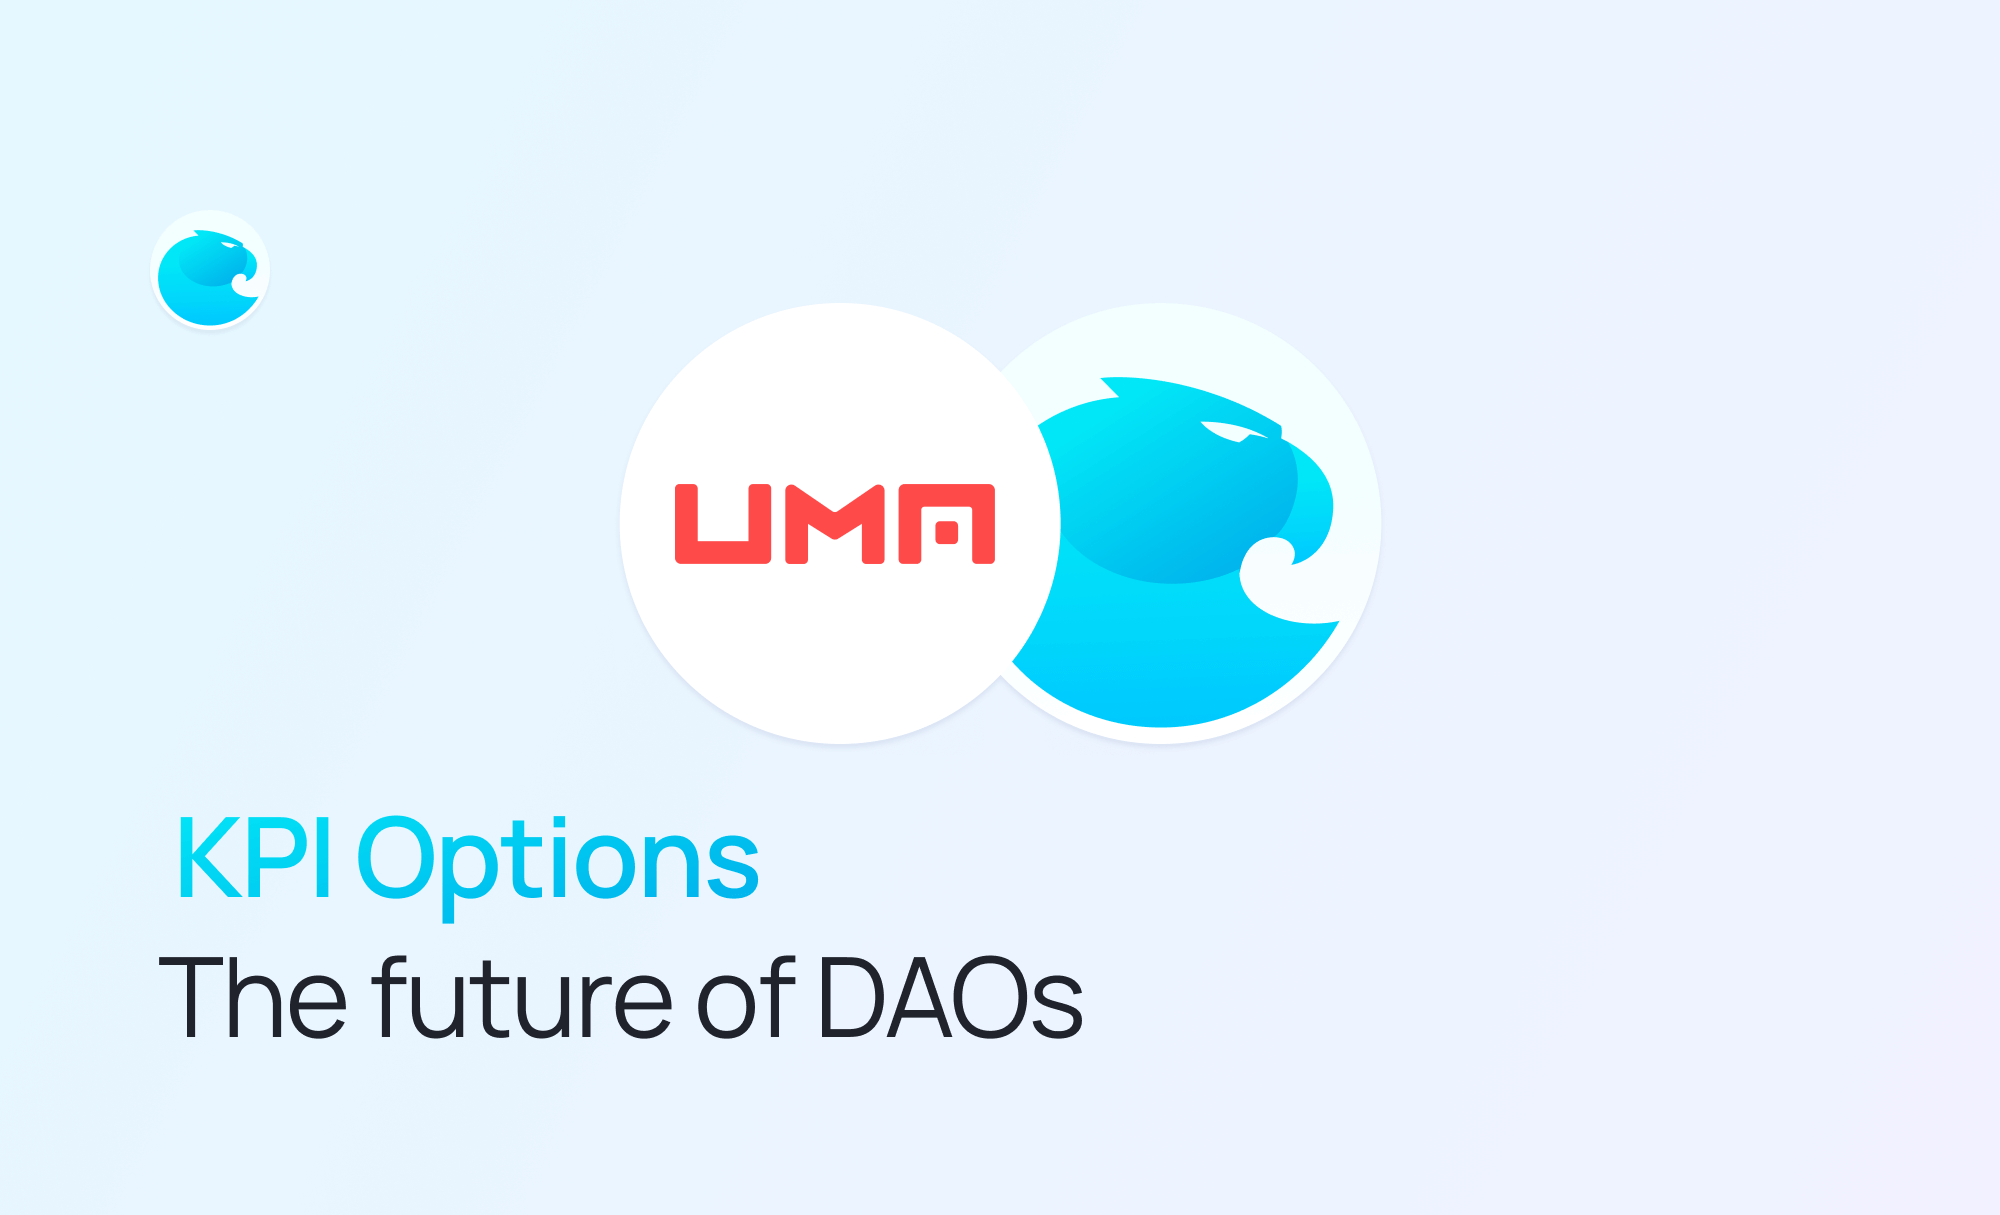 KPI options, the future of DAOs